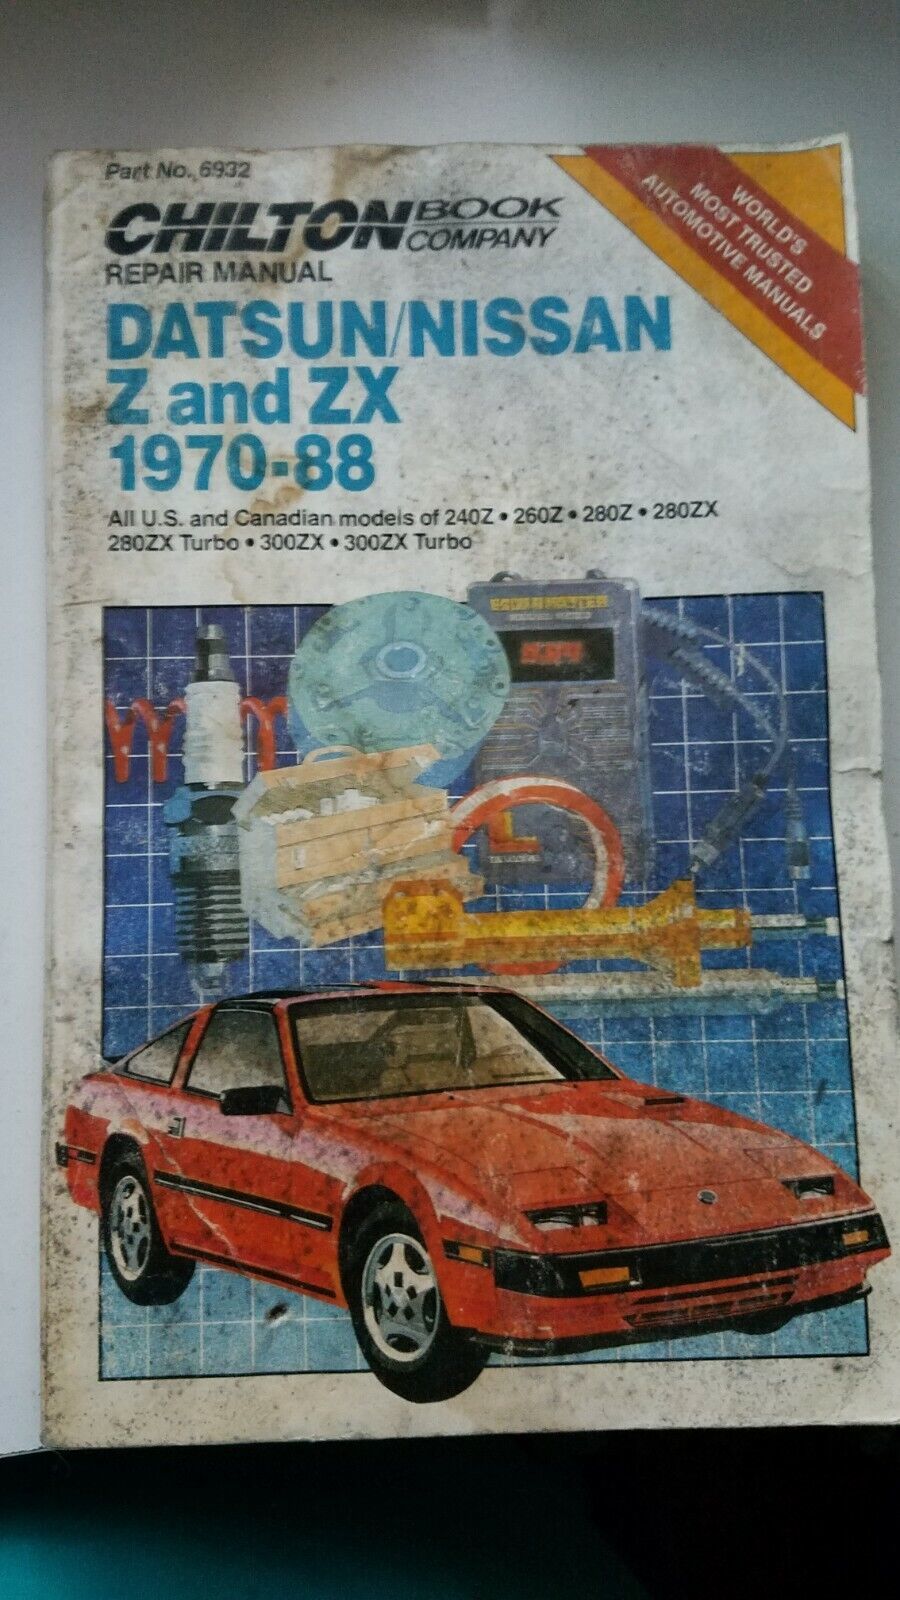 Primary image for 1970- 1988  Chilton's Datsun Datsun Nissan Z and ZX Repair Manual  #6932